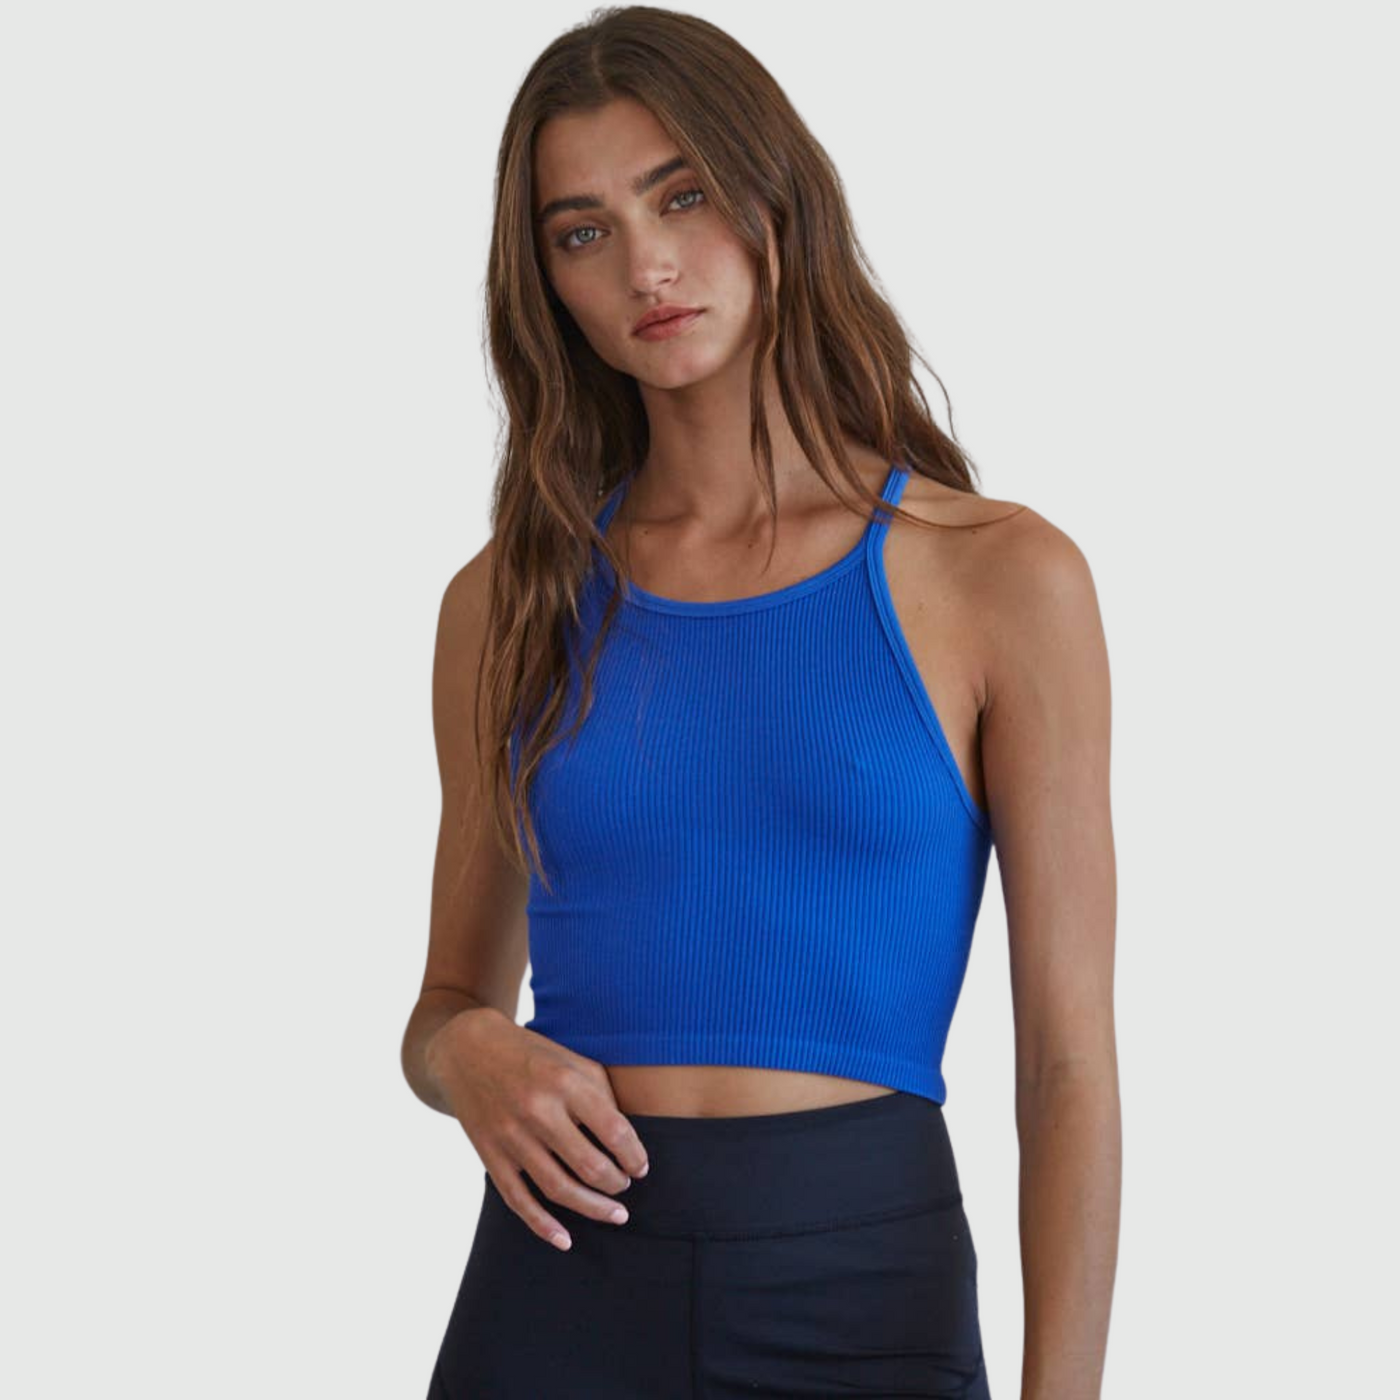 Knock Out Halter Tank Top in Royal Blue